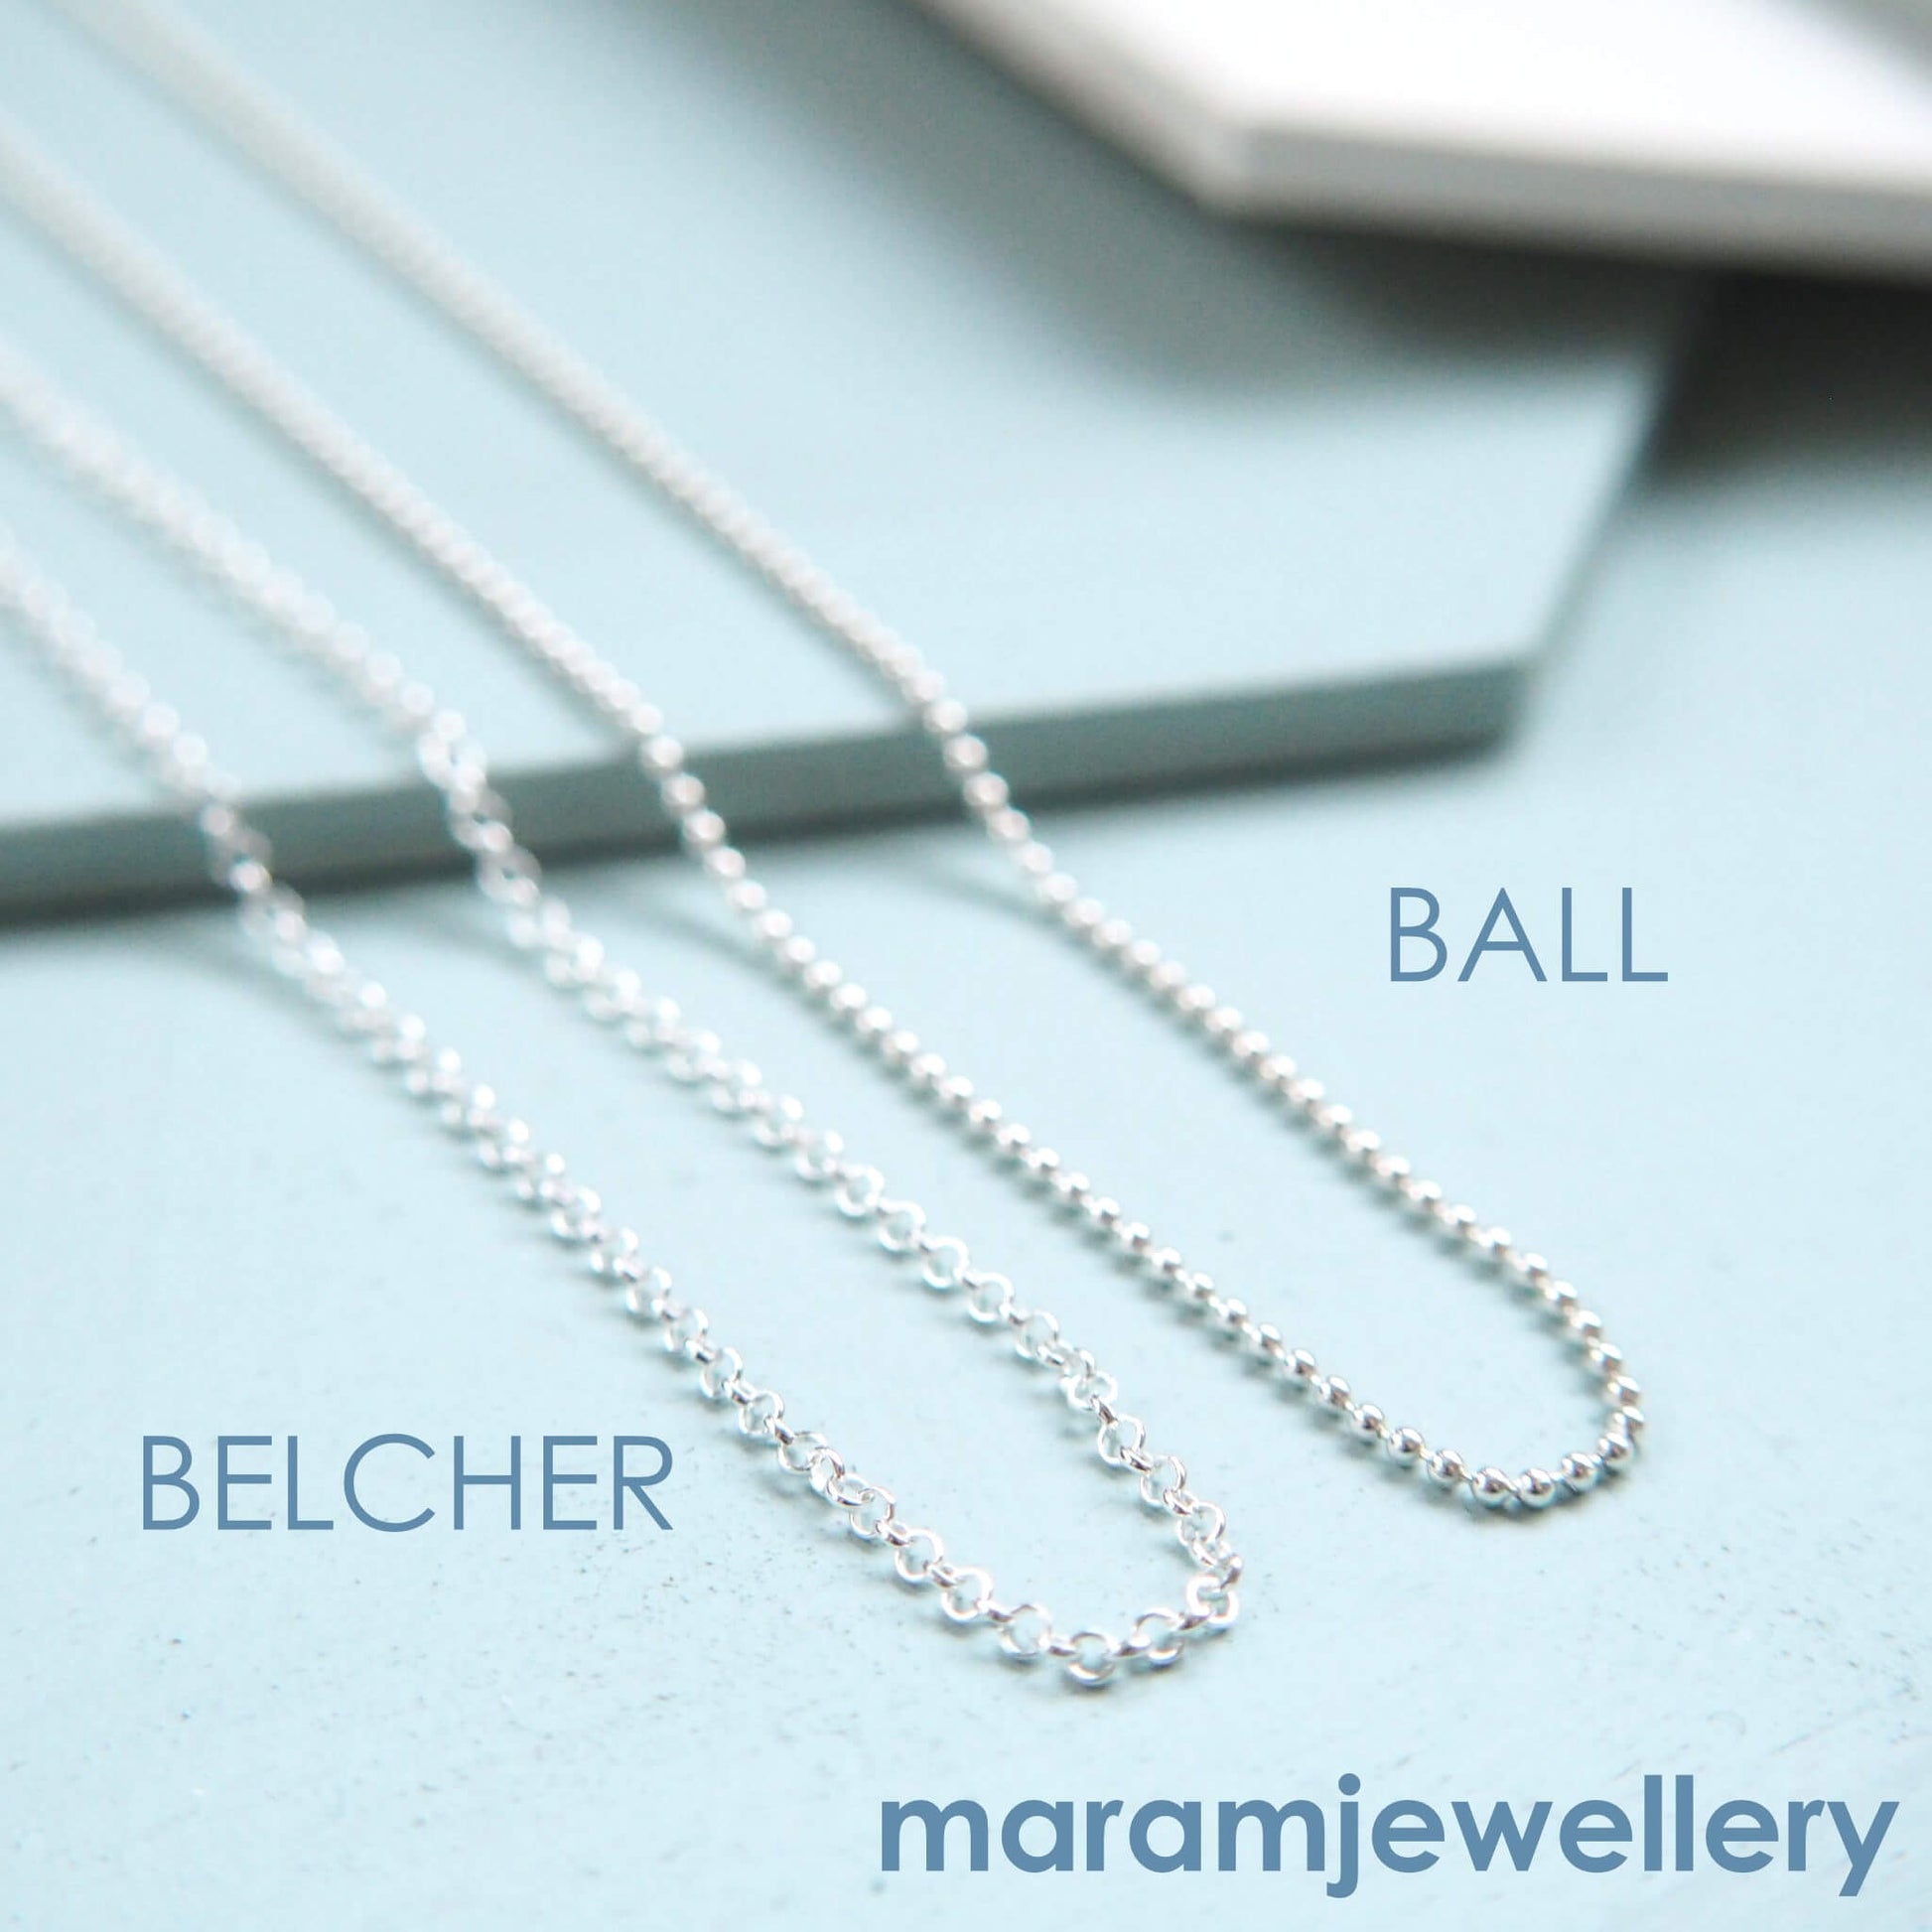 Chains available for maram jewellery pendants pictured on a duck blue background. THe chains are a simple ball chain and a narrow belcher/rolo chain. Available on necklaces made by maram jewellery in Scotland UK